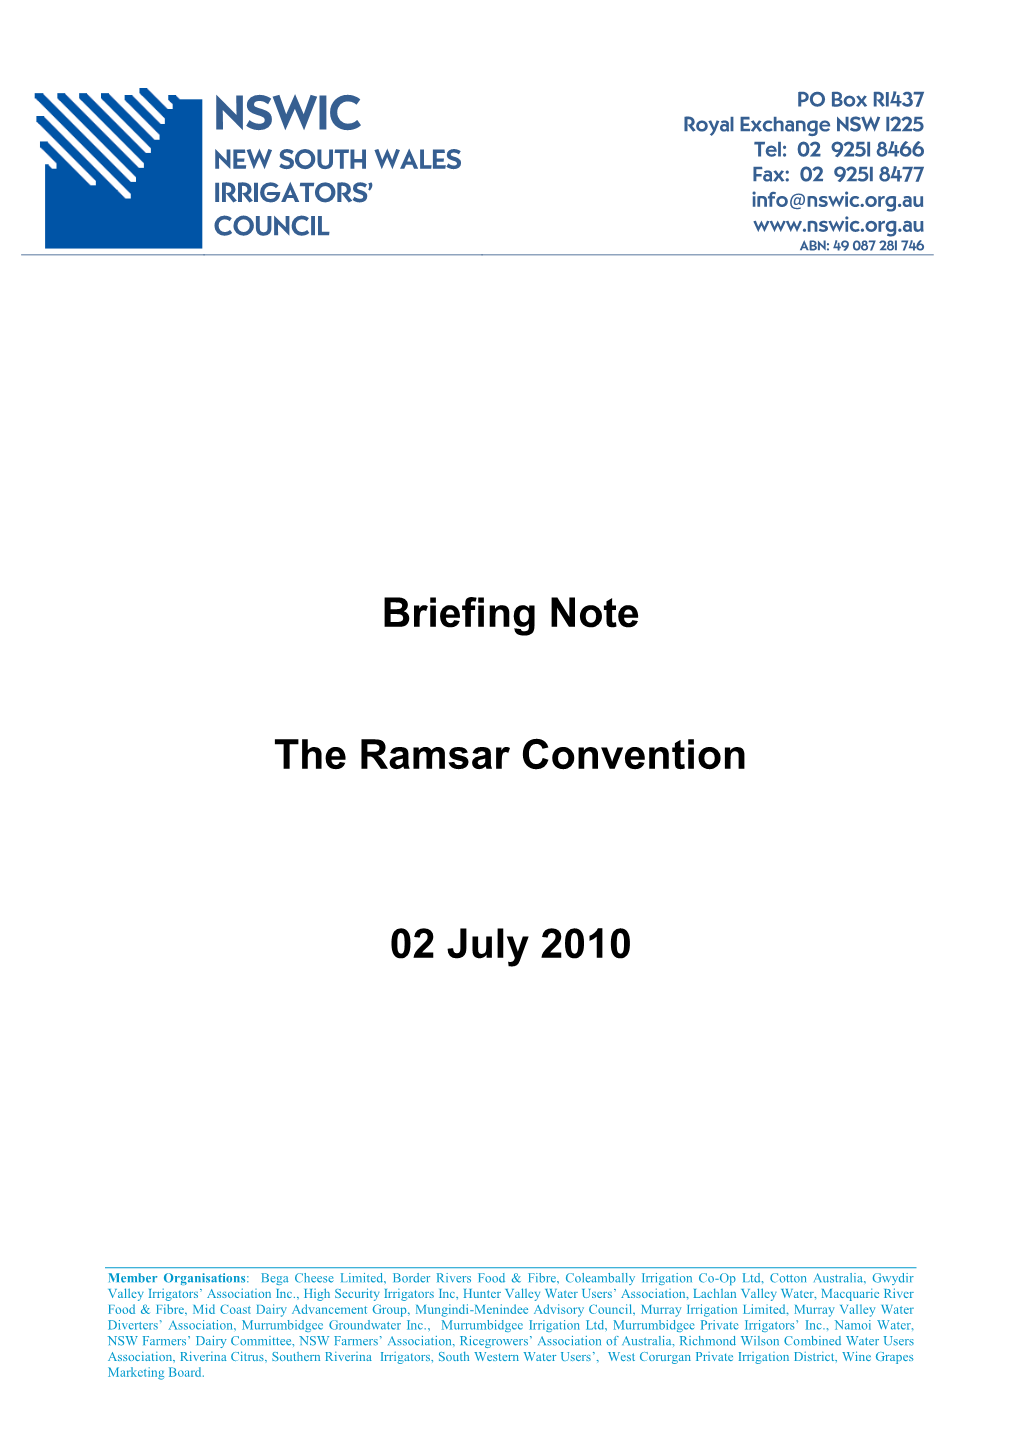 Briefing Note the Ramsar Convention 02 July 2010